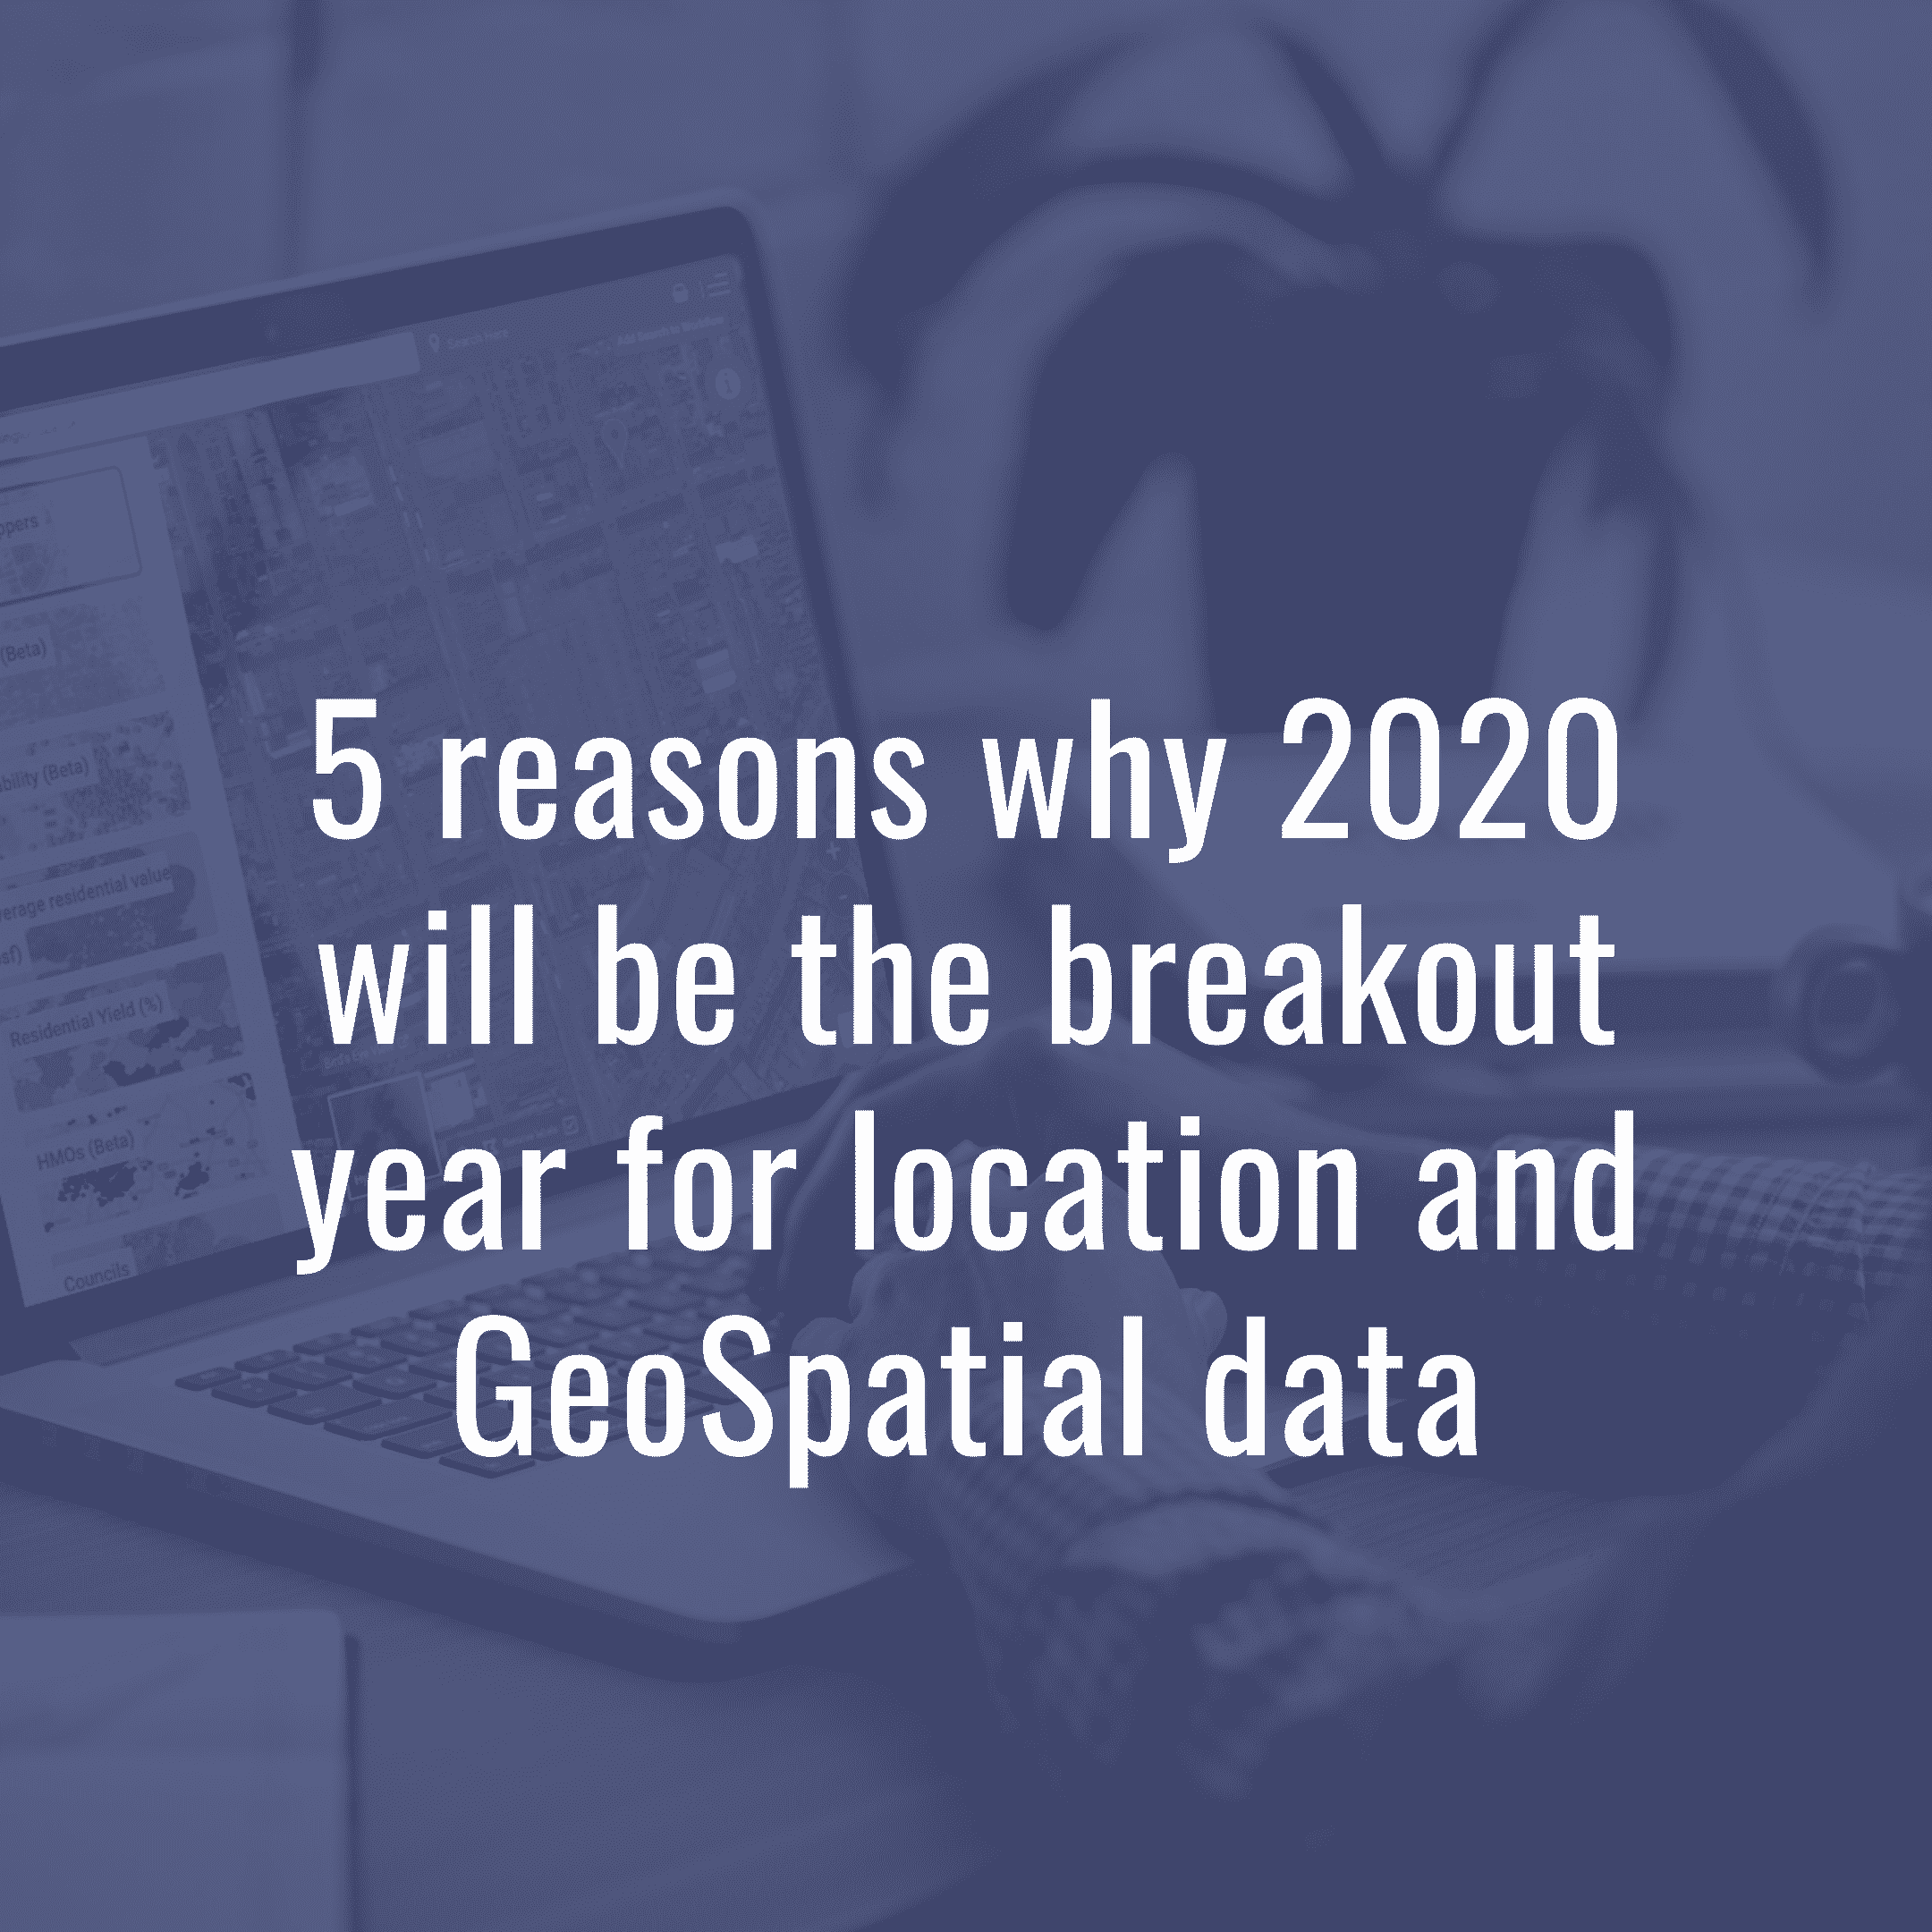 Location and GeoSpatial data in 2020